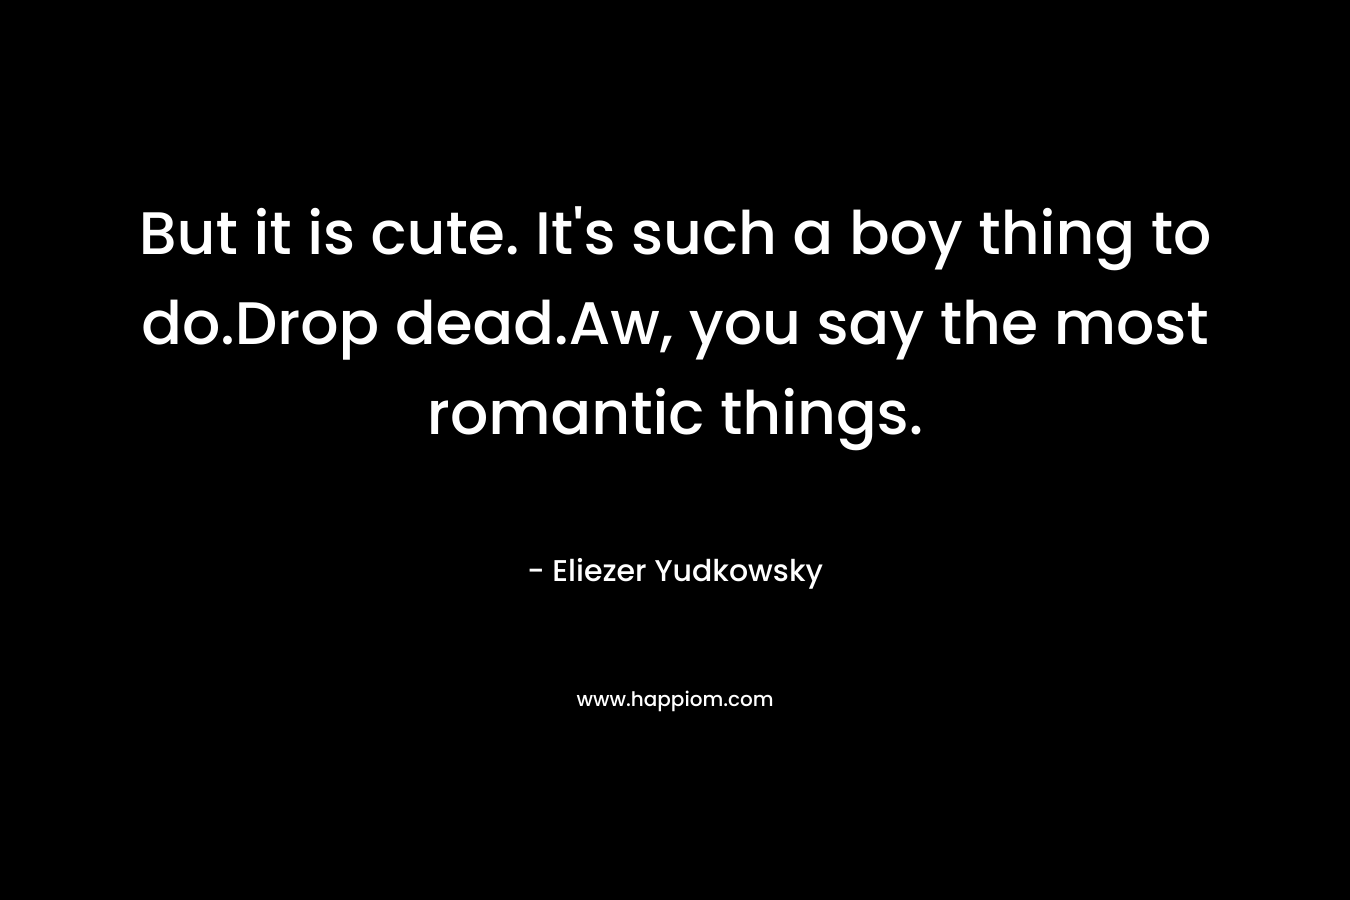 But it is cute. It's such a boy thing to do.Drop dead.Aw, you say the most romantic things.